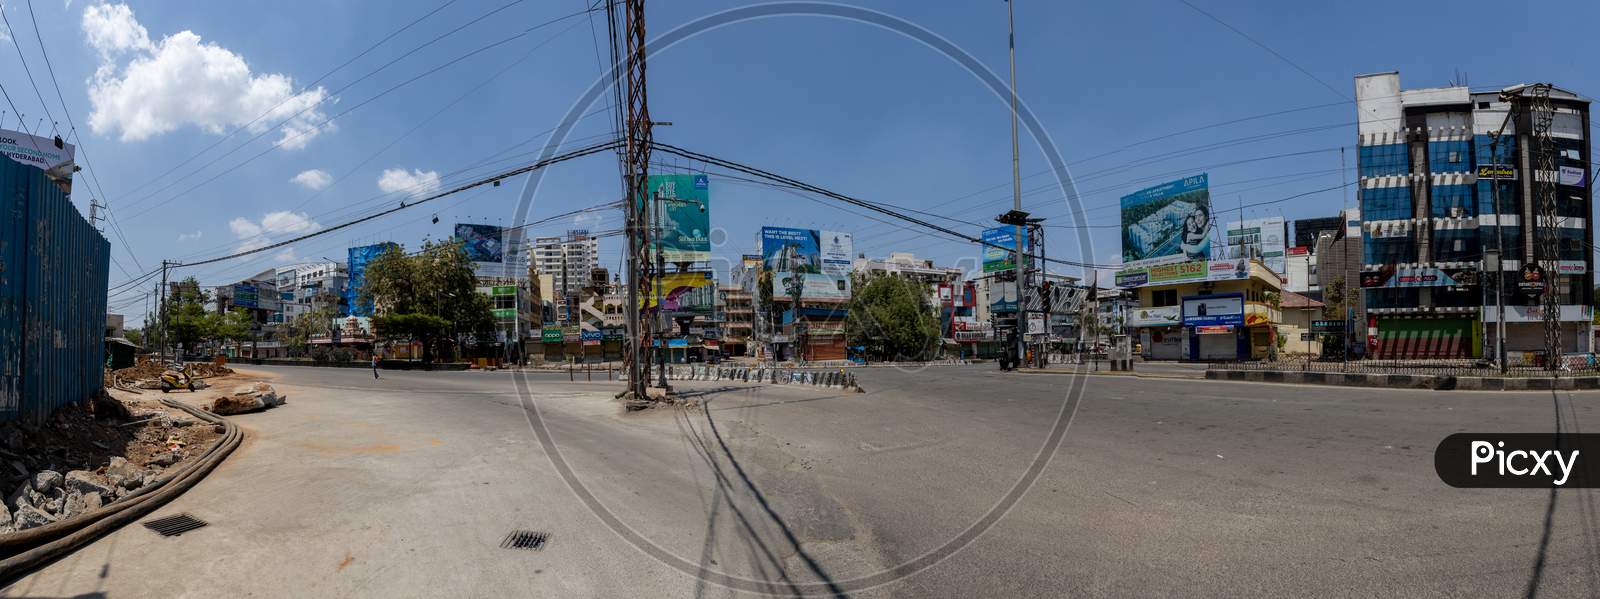 Janata Curfew , Deserted Roads  At Kothaguda  Signal  in Hyderabad  As Indian Prime Minister Narendra Modi Called For a 14 Hour Janta  Curfew Or Self-imposed  Quarantine To Break The  Highly Contagious  COVID 19 Or Corona Virus Spread